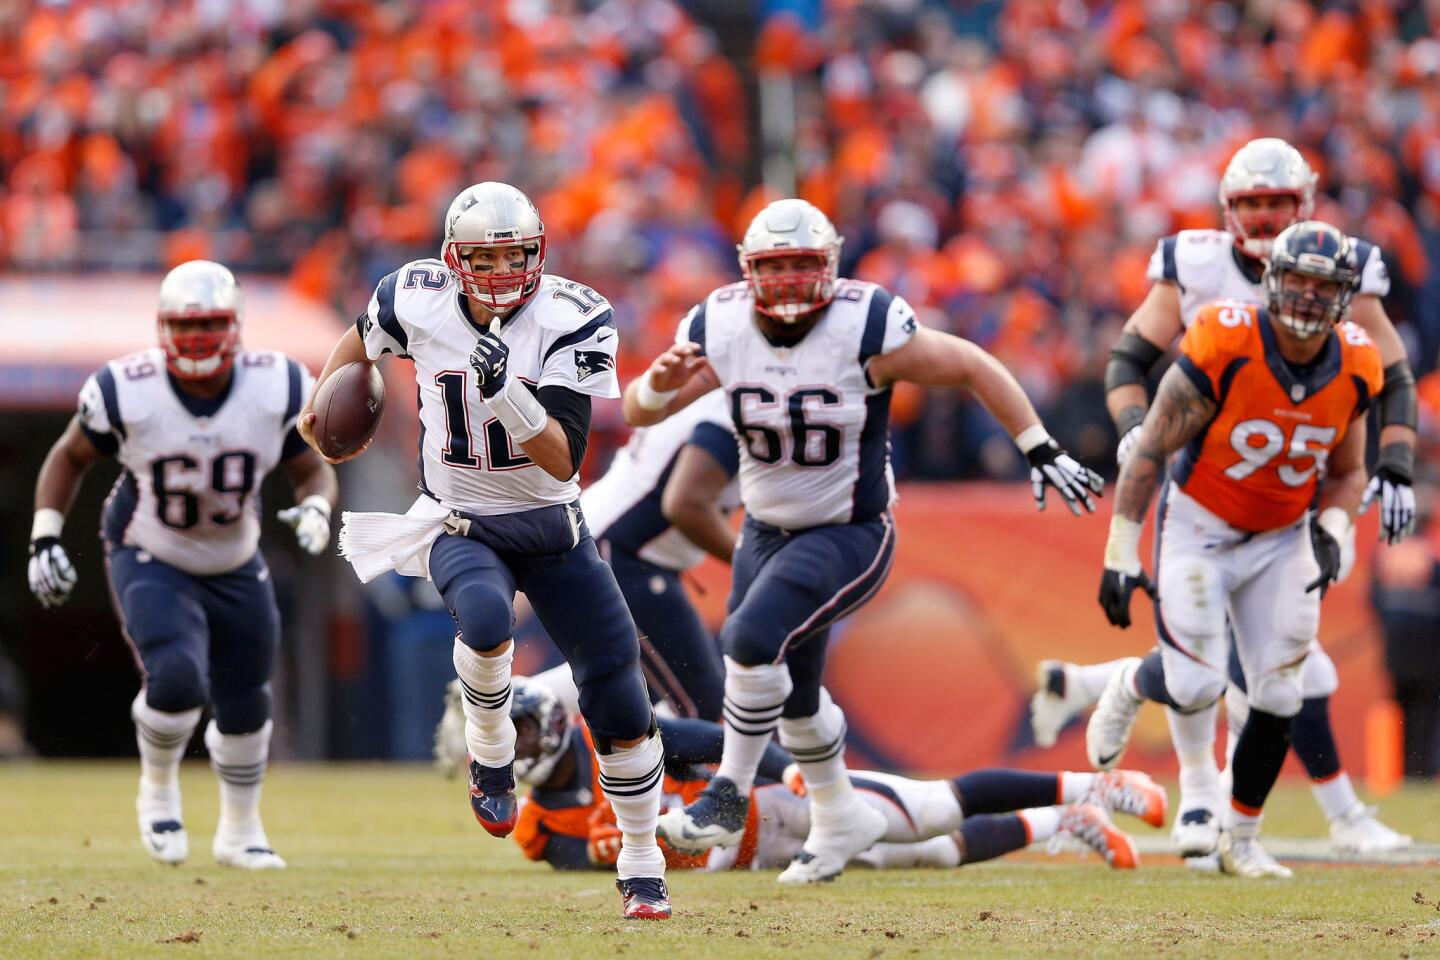 Patriots quarterback Tom Brady streaks for an 11-yard gain against the Broncos during the second quarter of the AFC Championship game on Jan. 24.